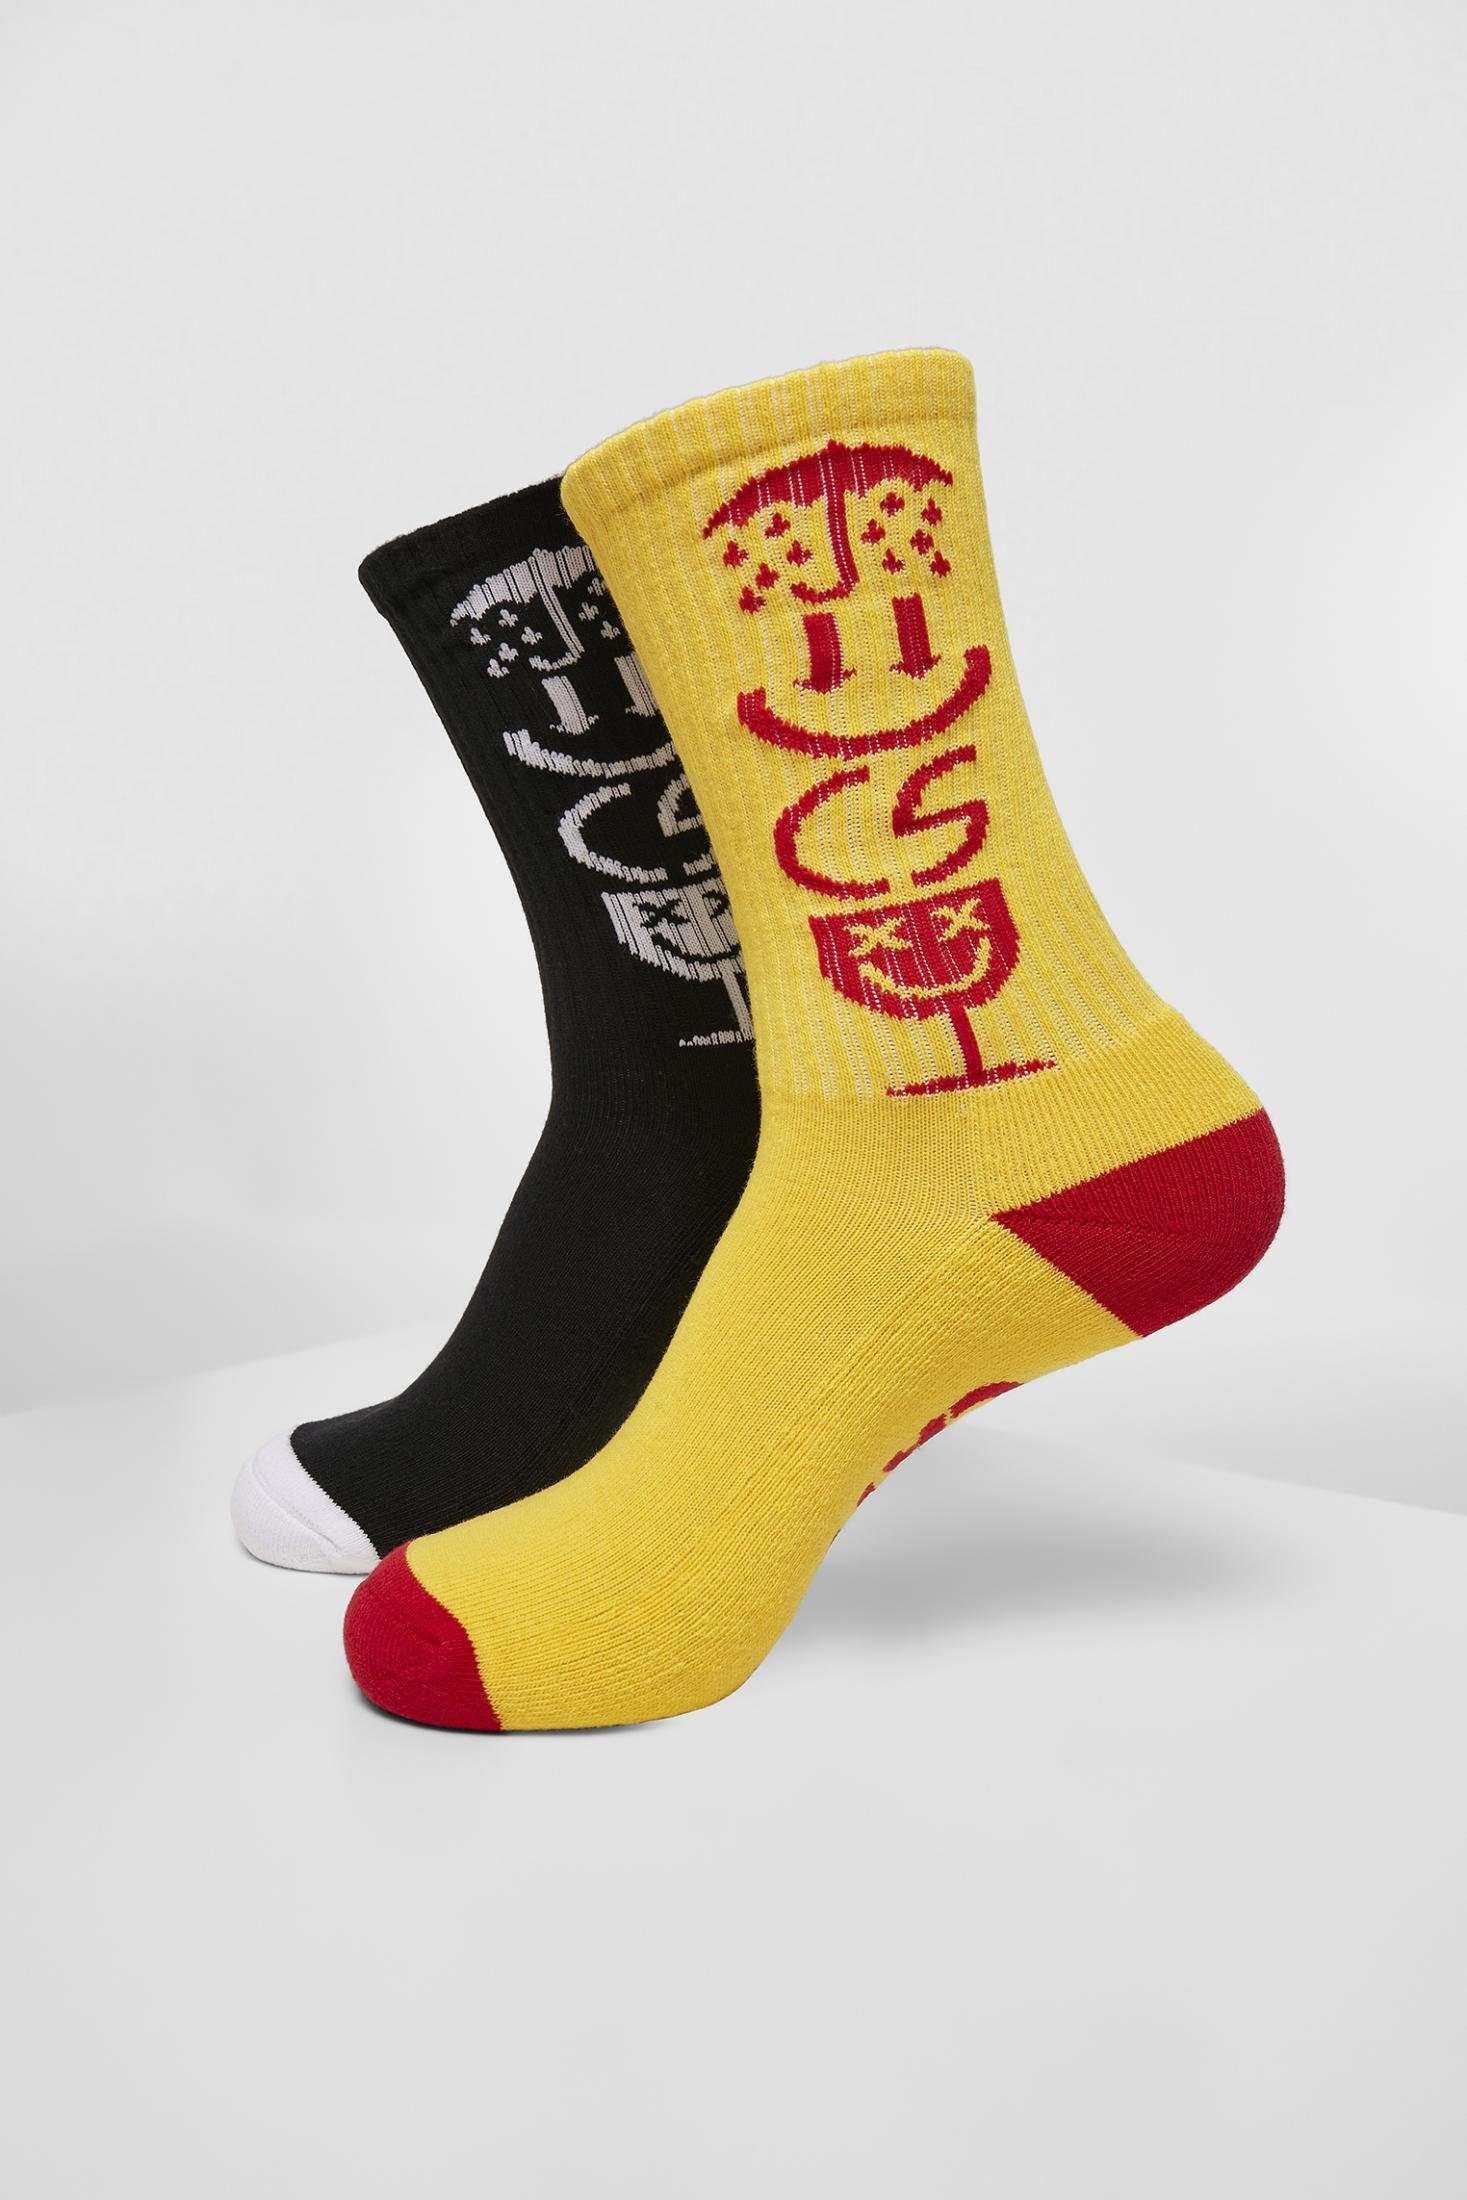 CAYLER & SONS Freizeitsocken Accessoires Iconic Icons Socks 2-Pack (1-Paar)